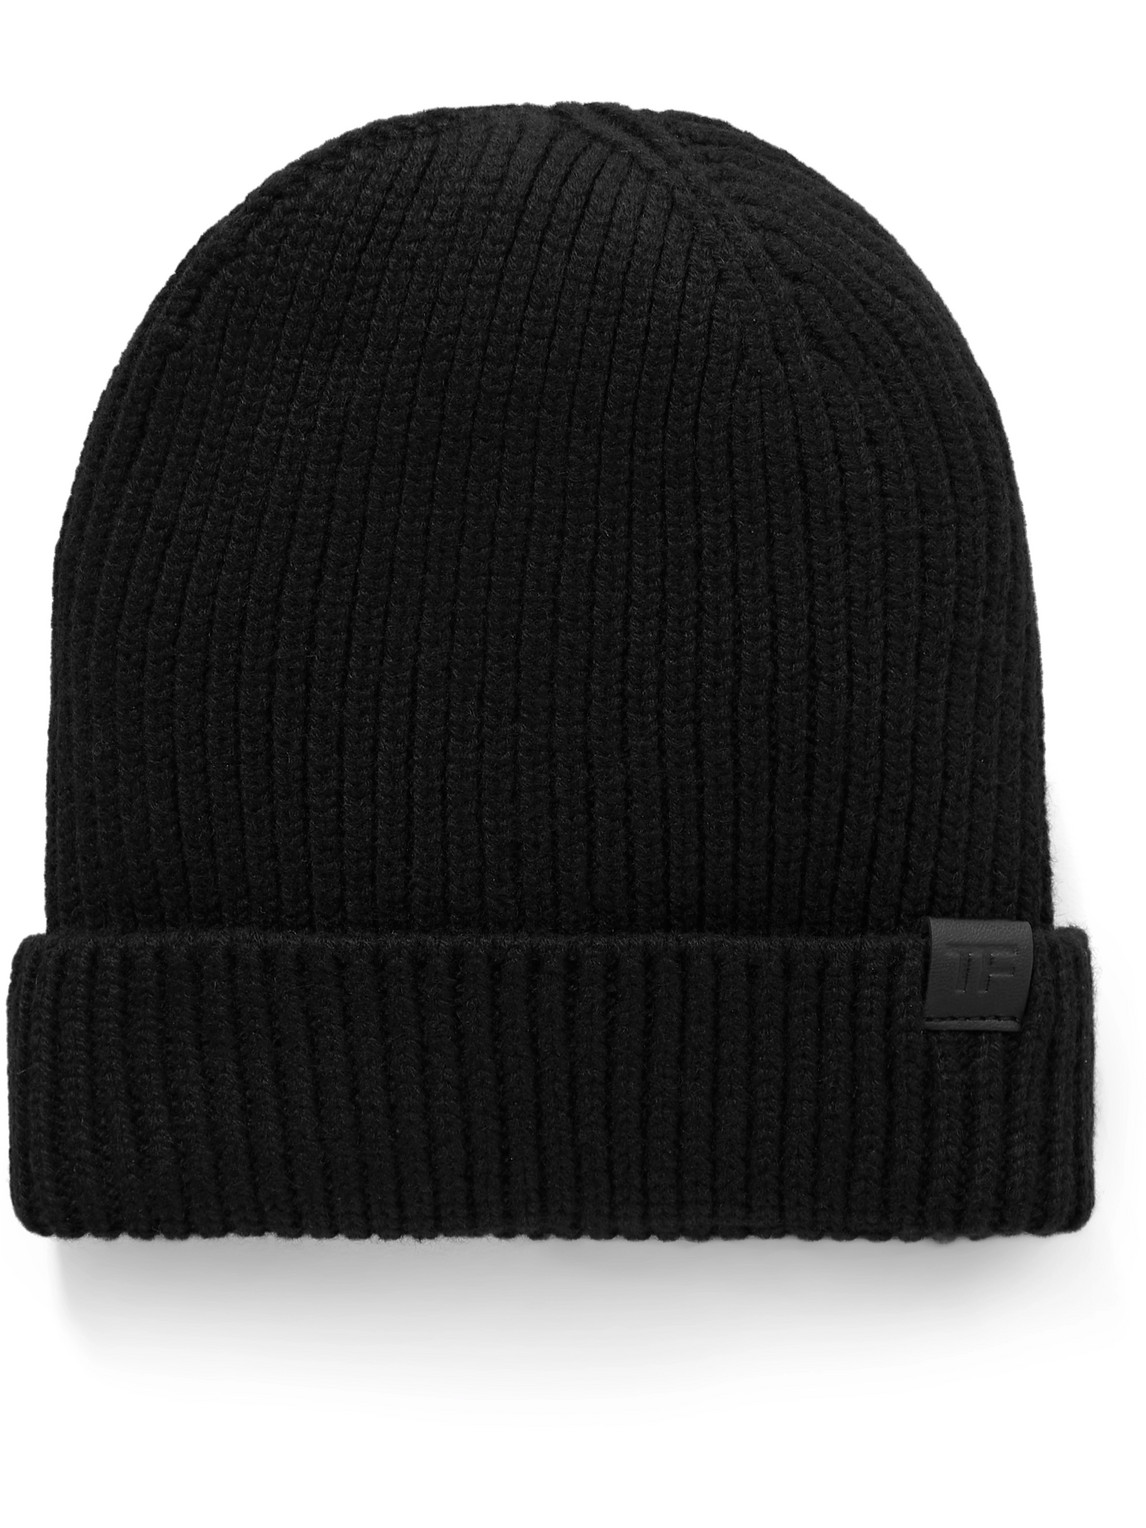 TOM FORD LEATHER-TRIMMED RIBBED CASHMERE BEANIE